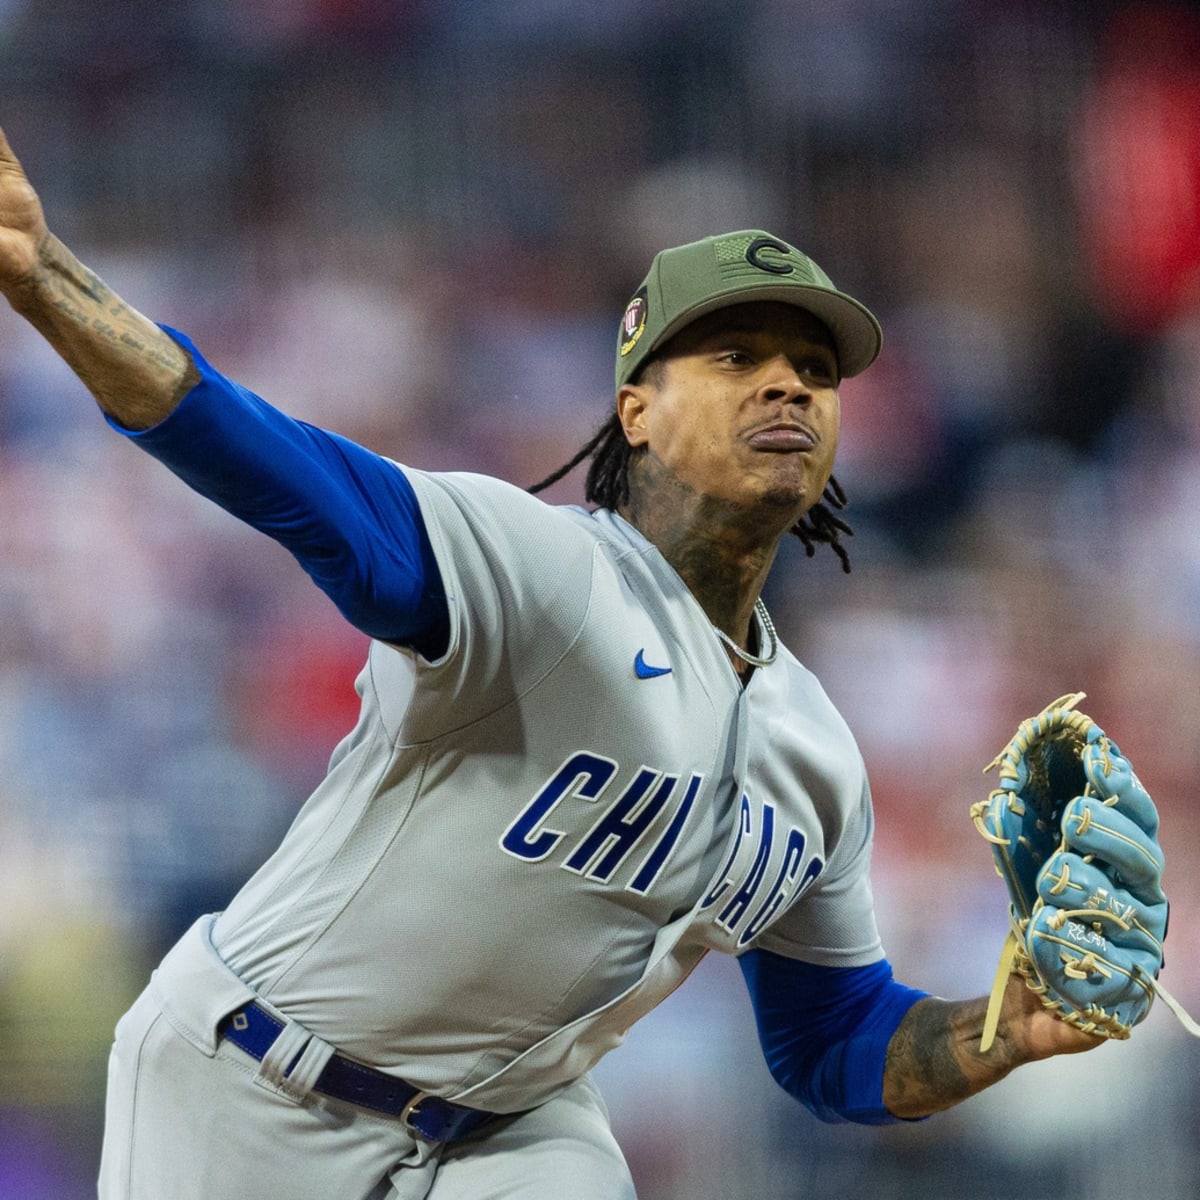 Marcus Stroman: Chicago Cubs pitcher meets 8-year-old fan